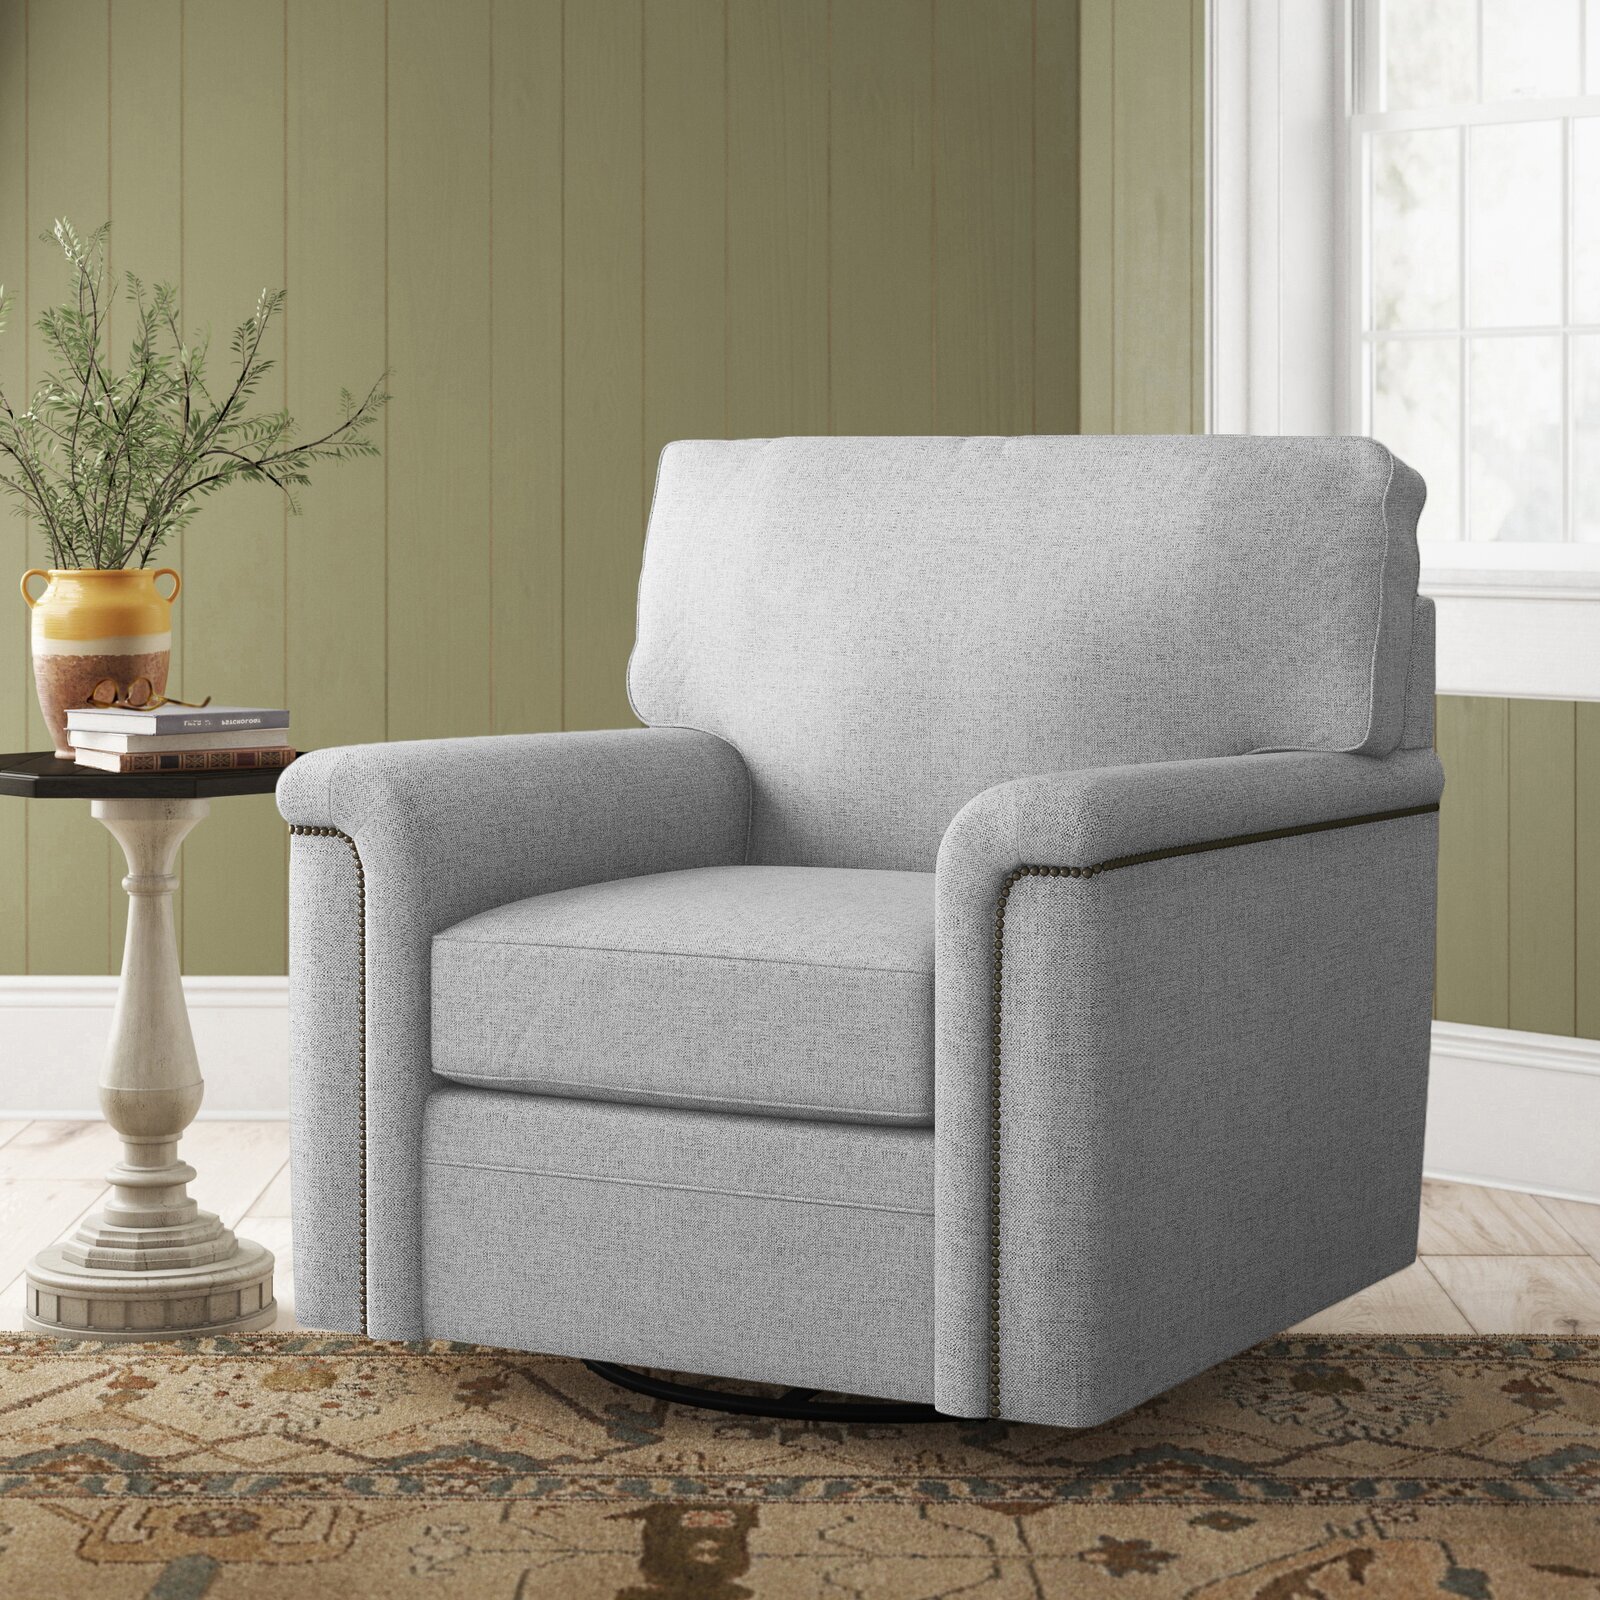 A round oversized chair with removable cushions